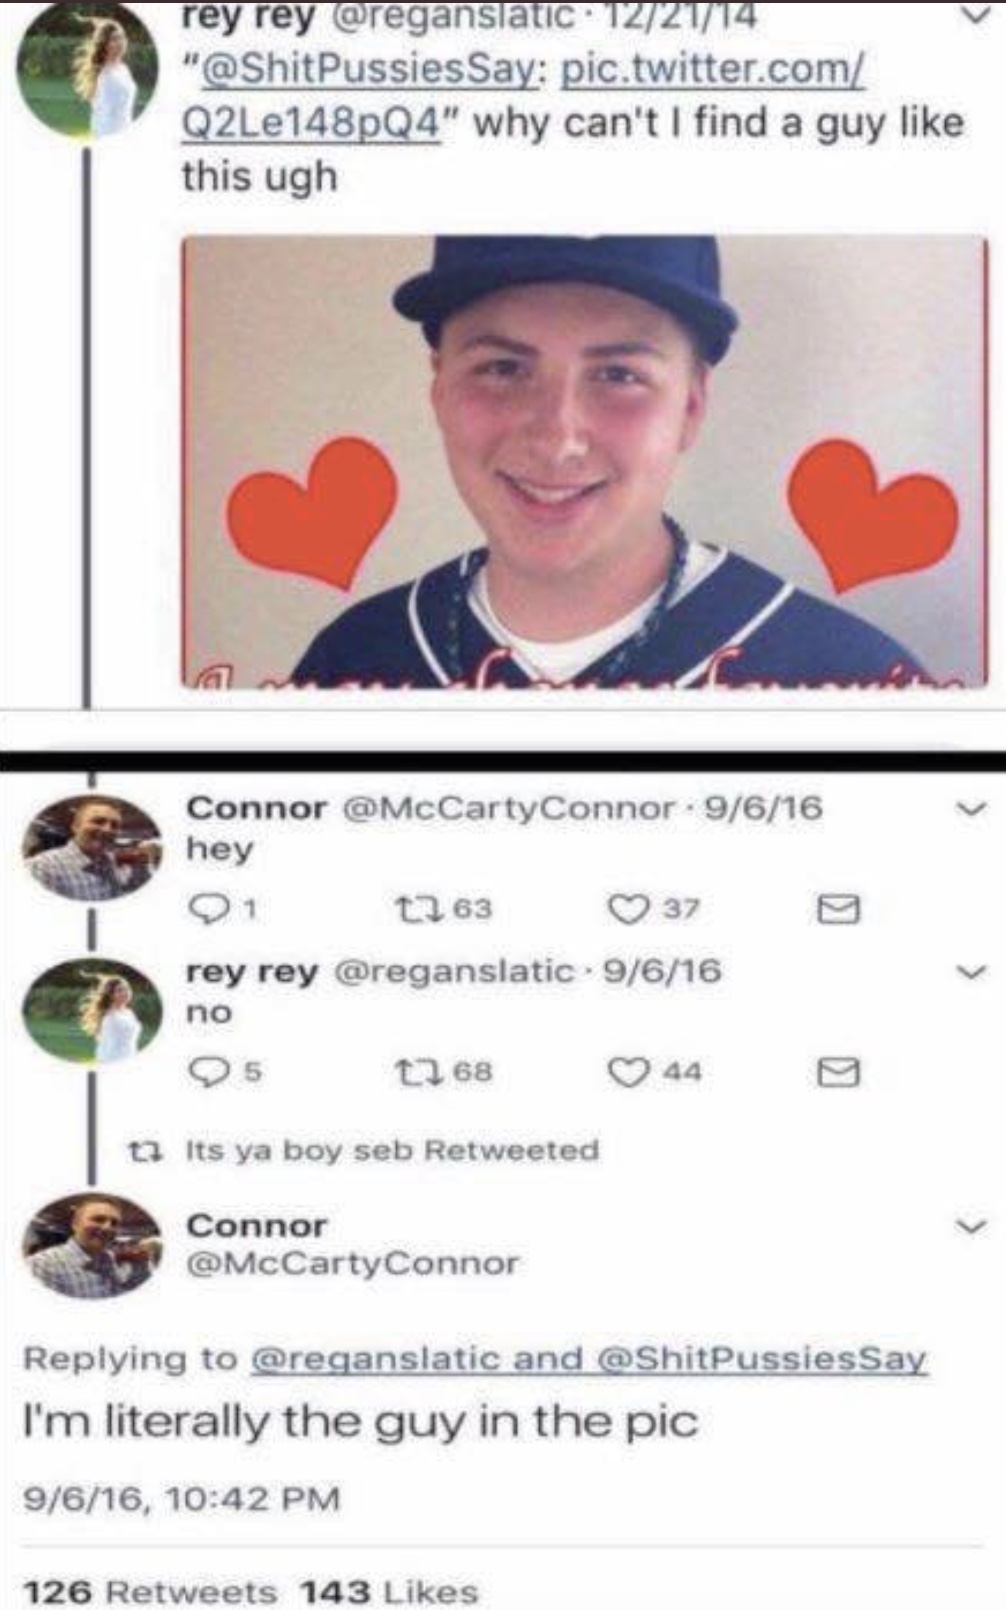 dank meme twitter why can t i find a guy like this - rey rey . 122114 " Say pic.twitter.com Q2Le148pQ4" why can't I find a guy this ugh Connor Connor 9616 hey 21 1263 37 rey rey . 9616 no 95 2 68 44 7 Its ya boy seb Retweeted Connor and Say I'm literally 